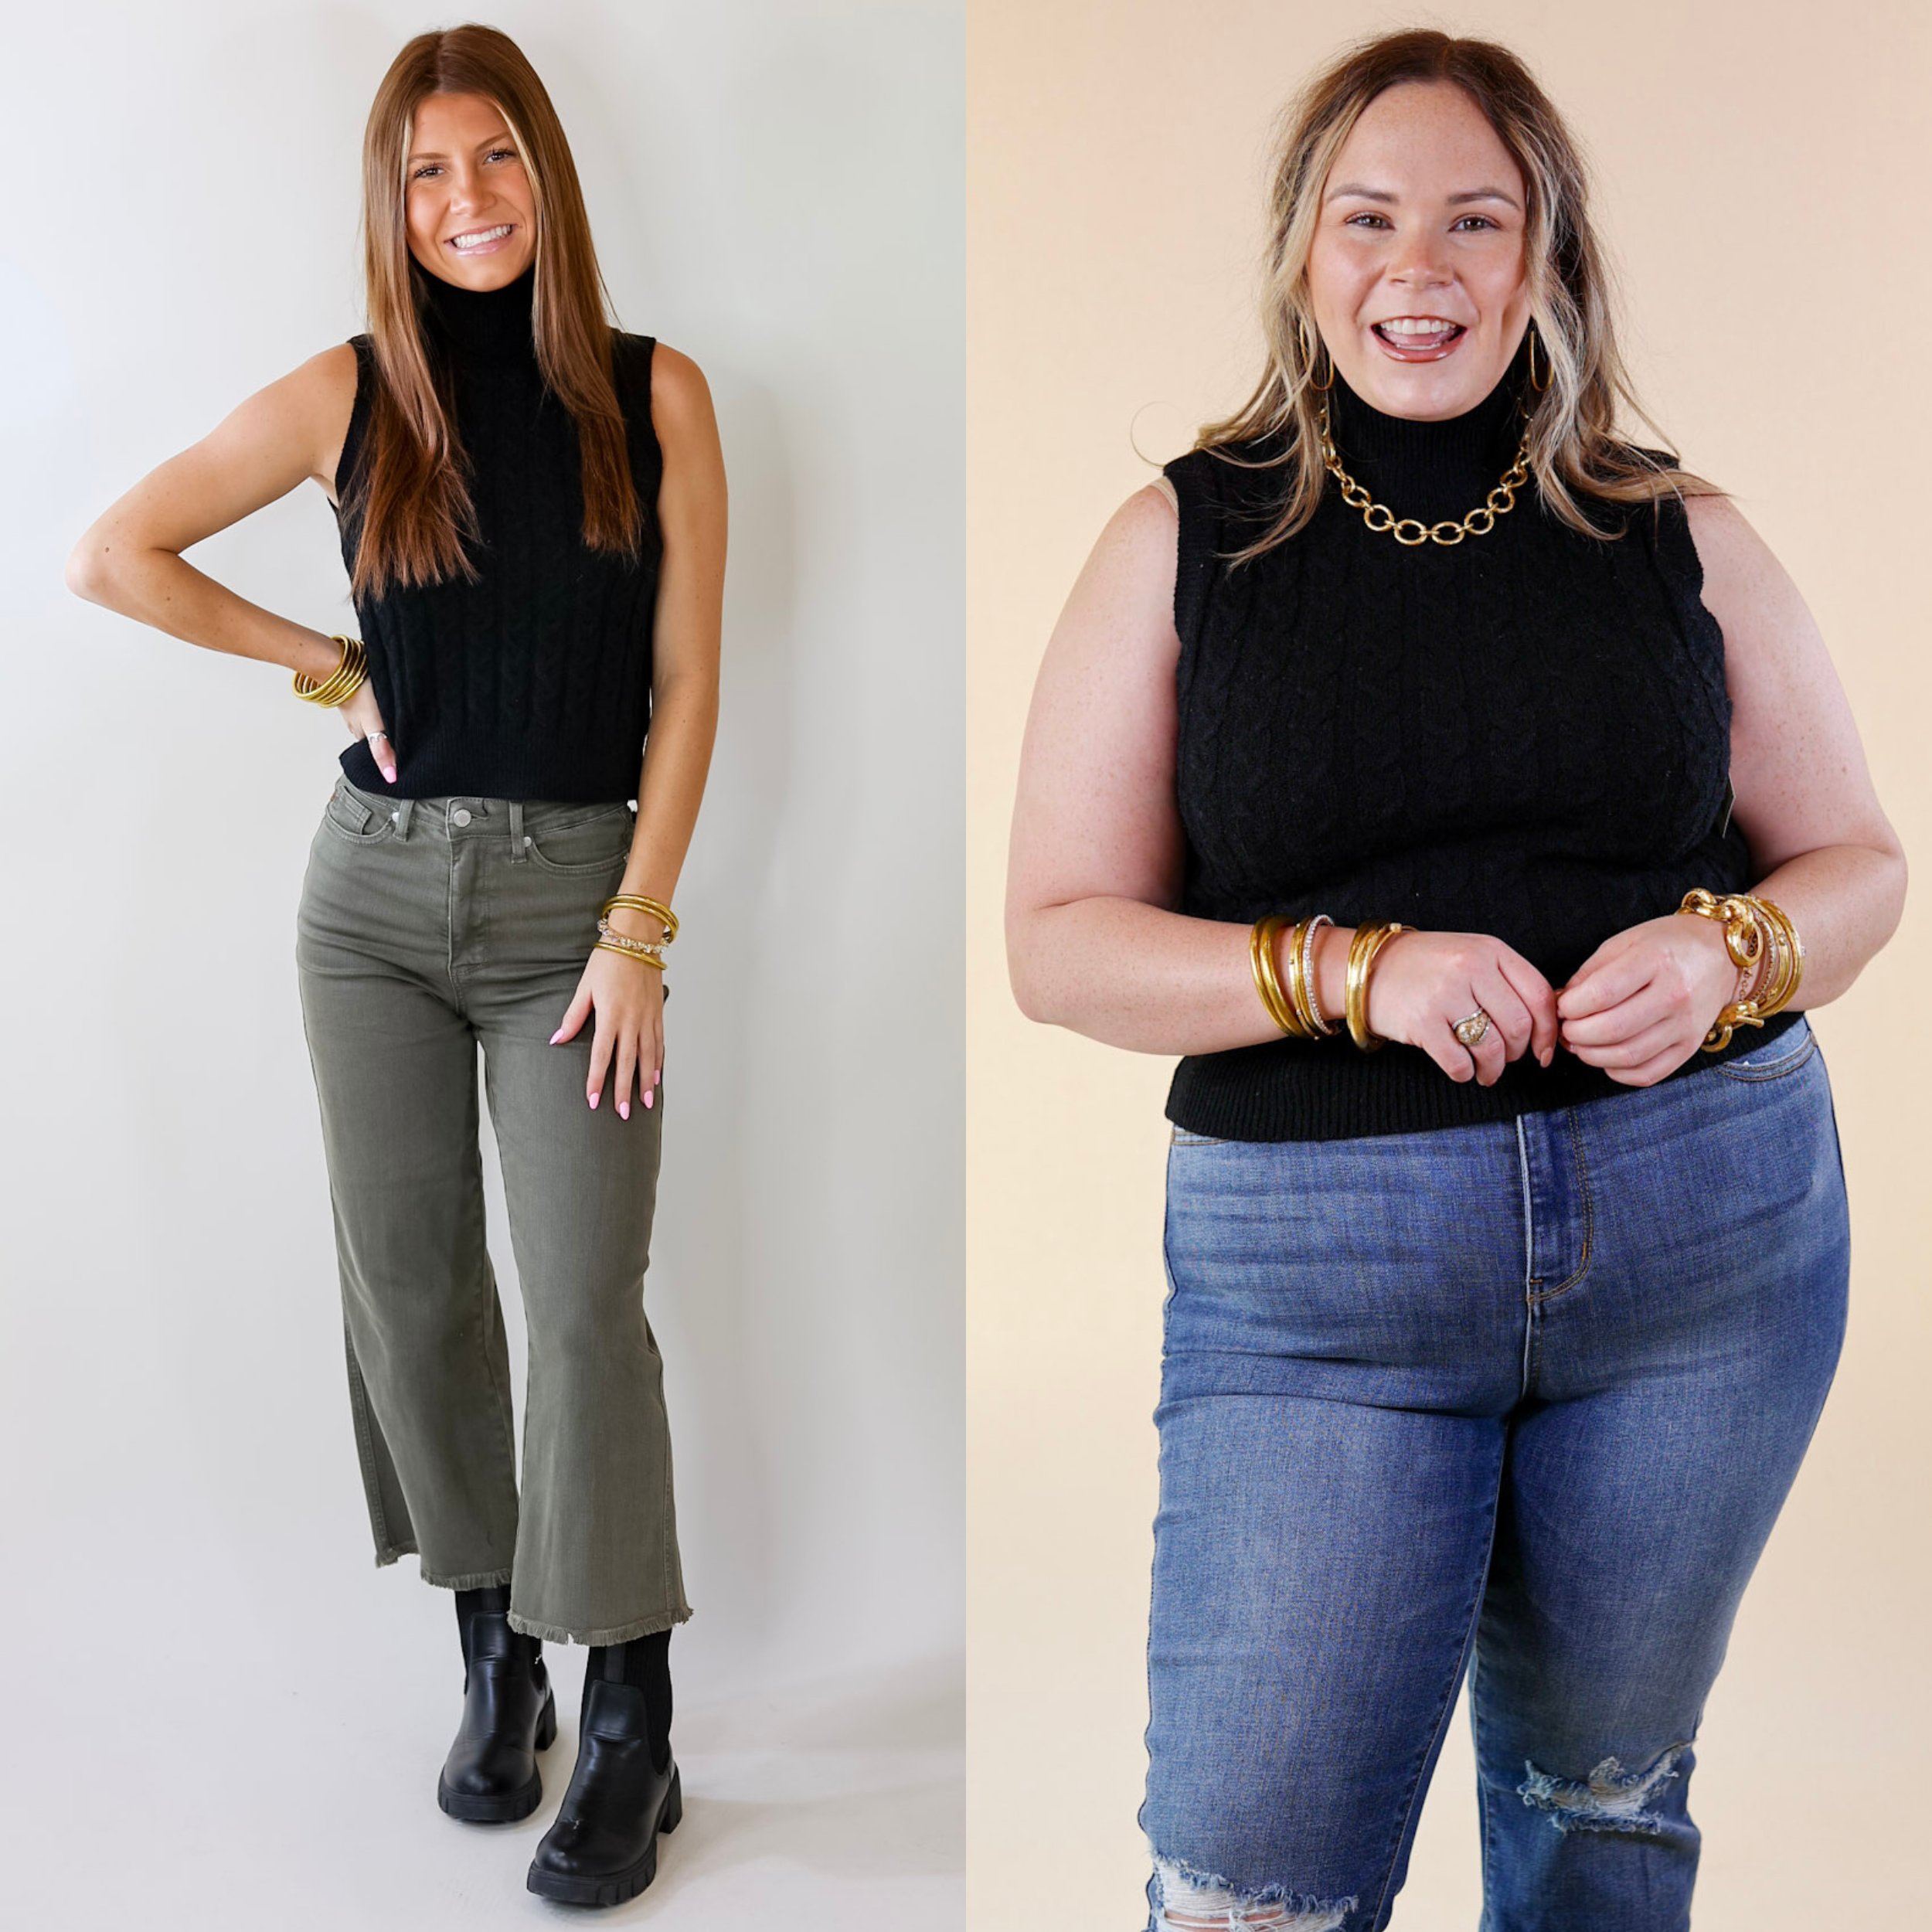 Model is wearing a sleeveless black cropped turtleneck sweater. Model has paired the sweater with olive green pants, black booties, and gold tone jewelry.